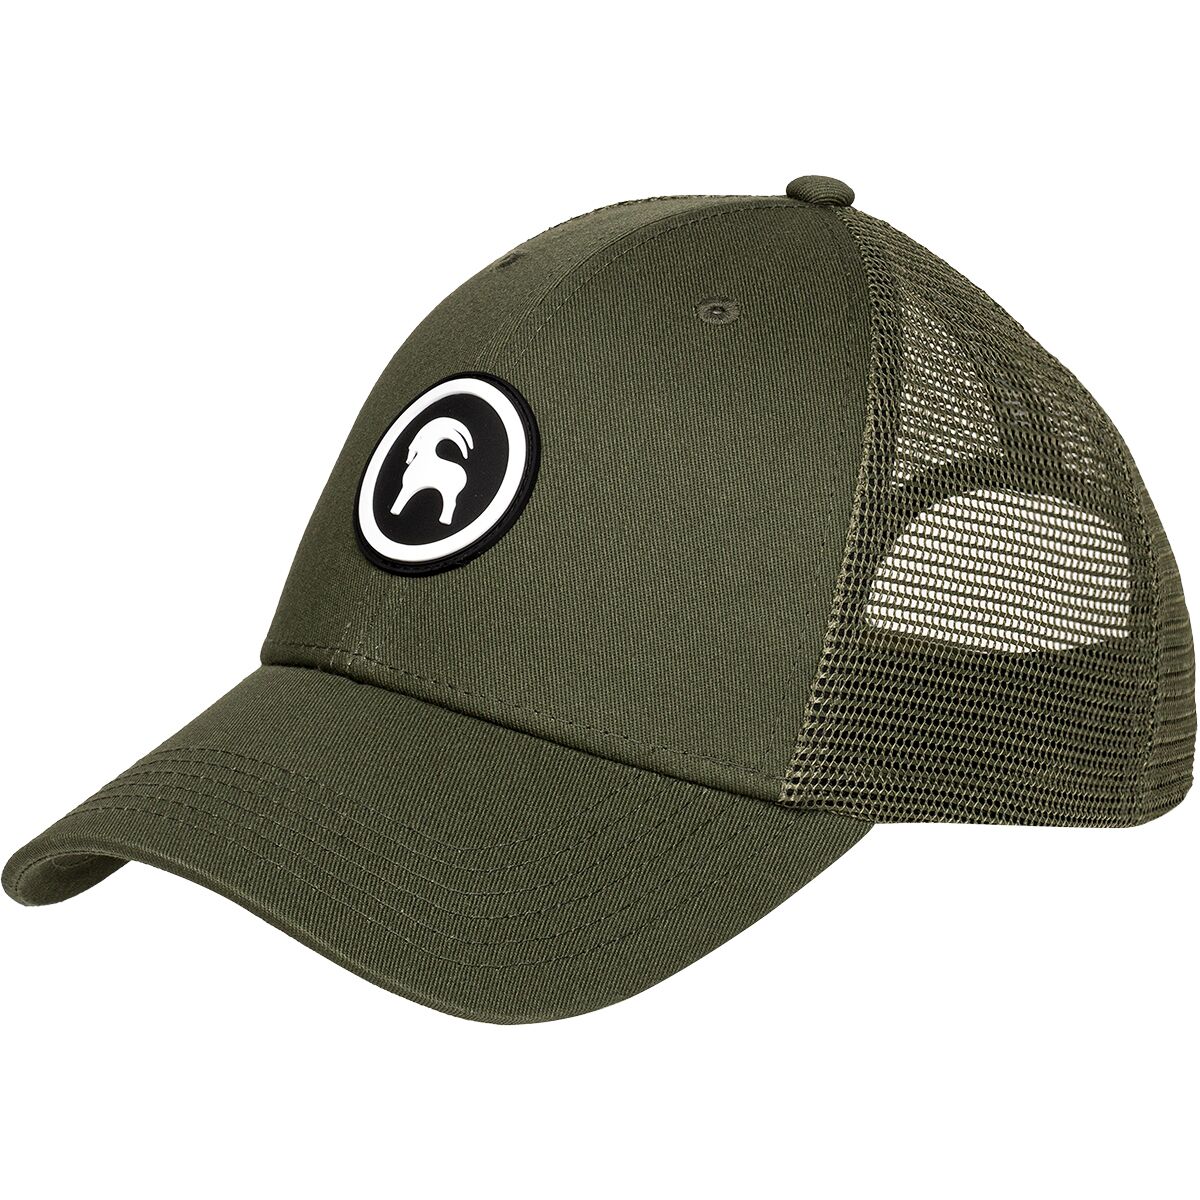 Backcountry Patch Goat Trucker Hat Olive Night, One Size